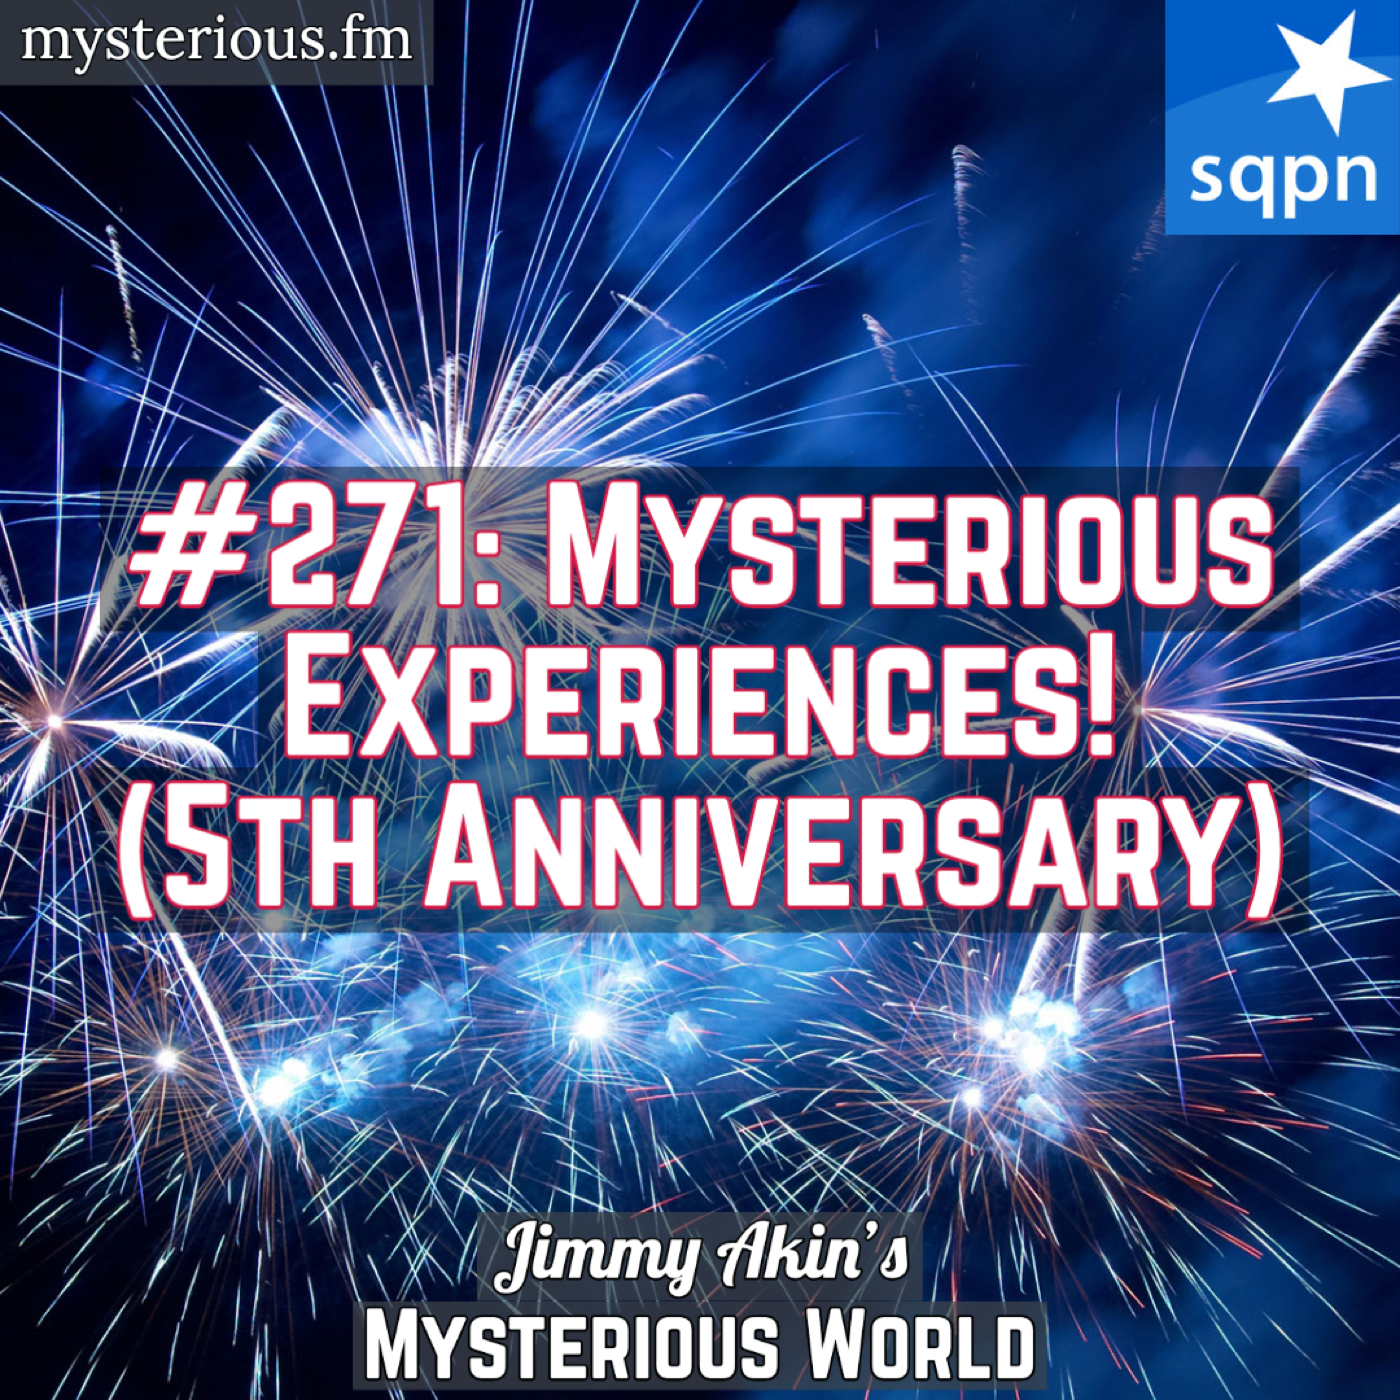 Your Mysterious Experiences! (5th Anniversary)